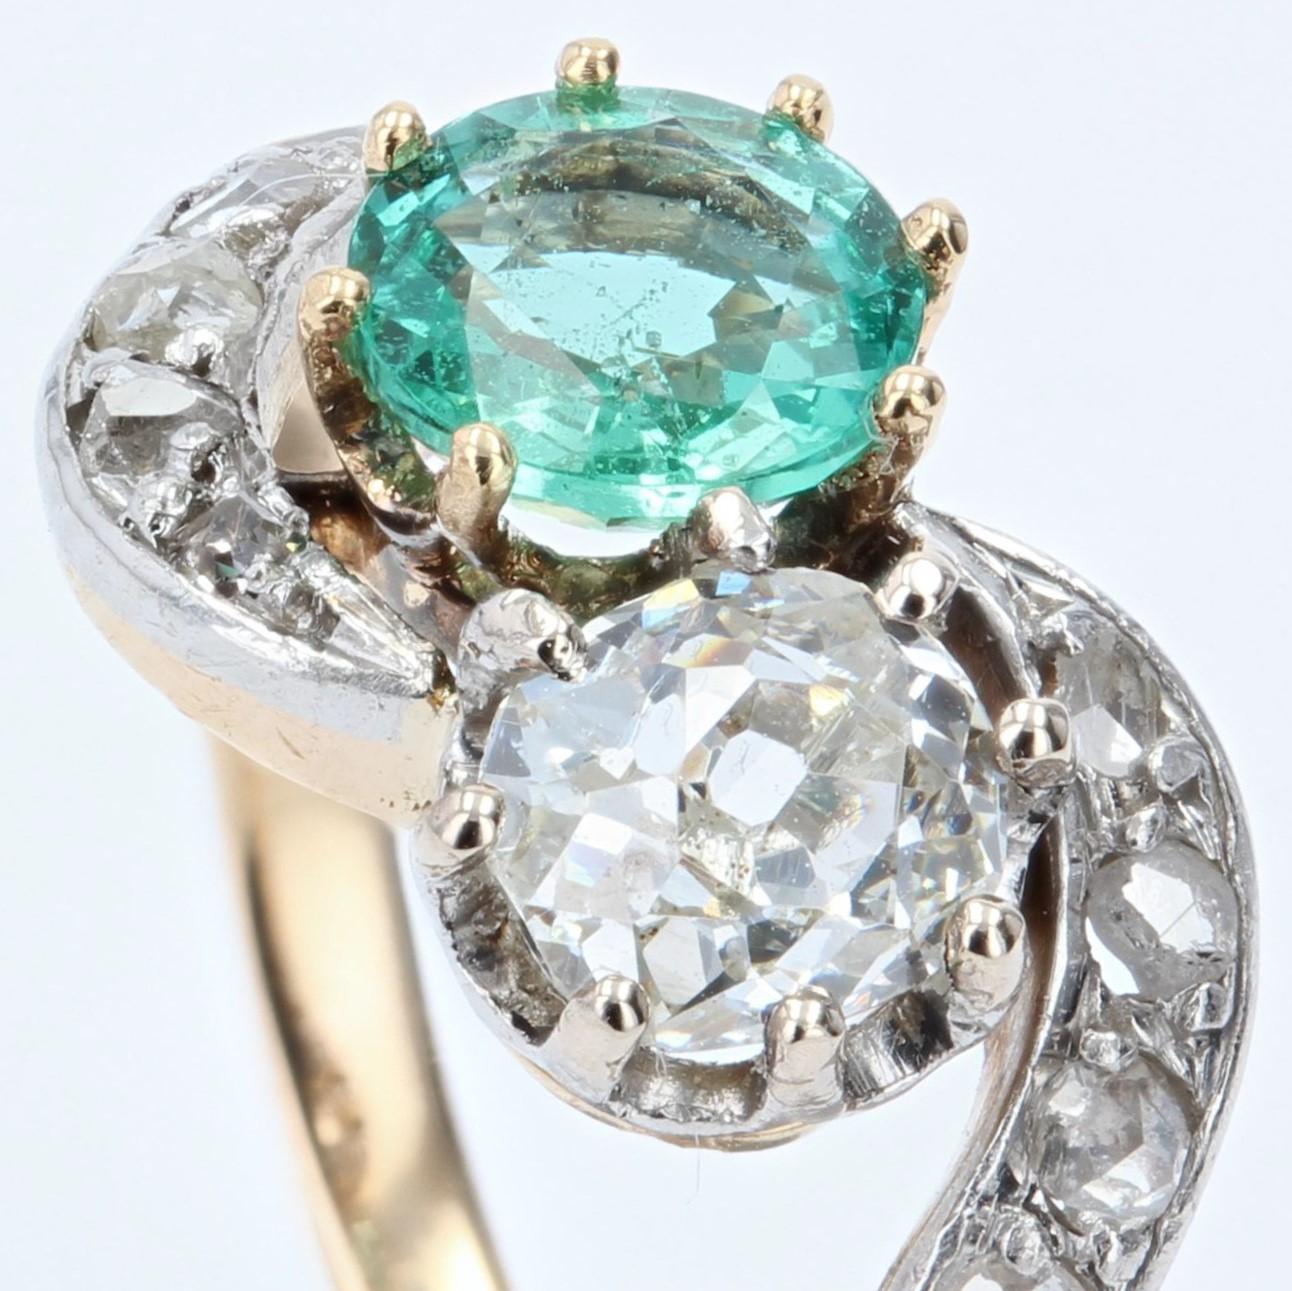 French, 19th Century, Emerald Diamond 18 Karat Yellow Gold You and Me Ring 1